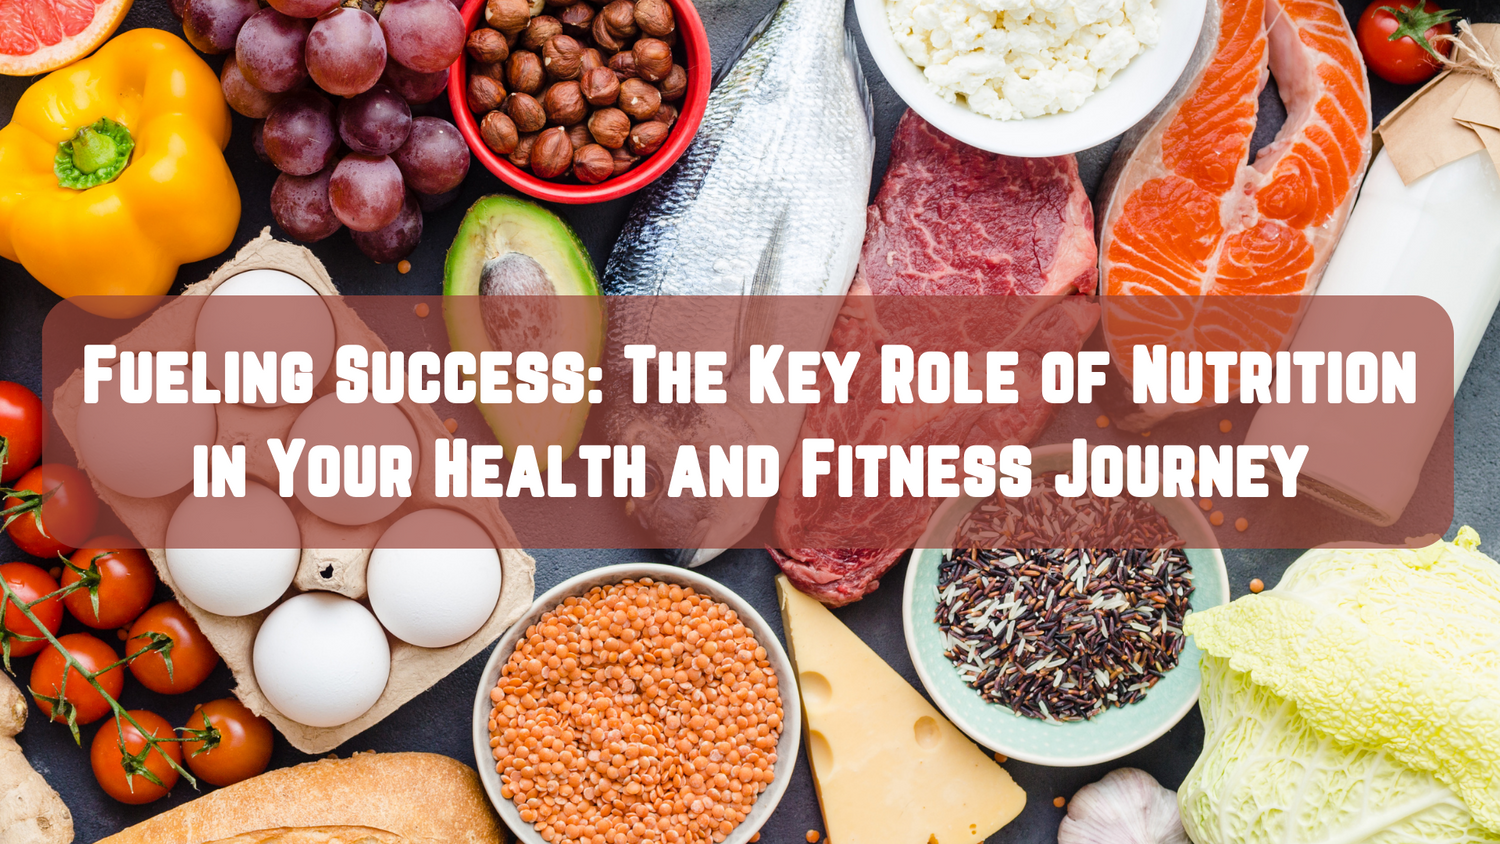 Fueling Success: The Key Role of Nutrition in Your Health and Fitness Journey